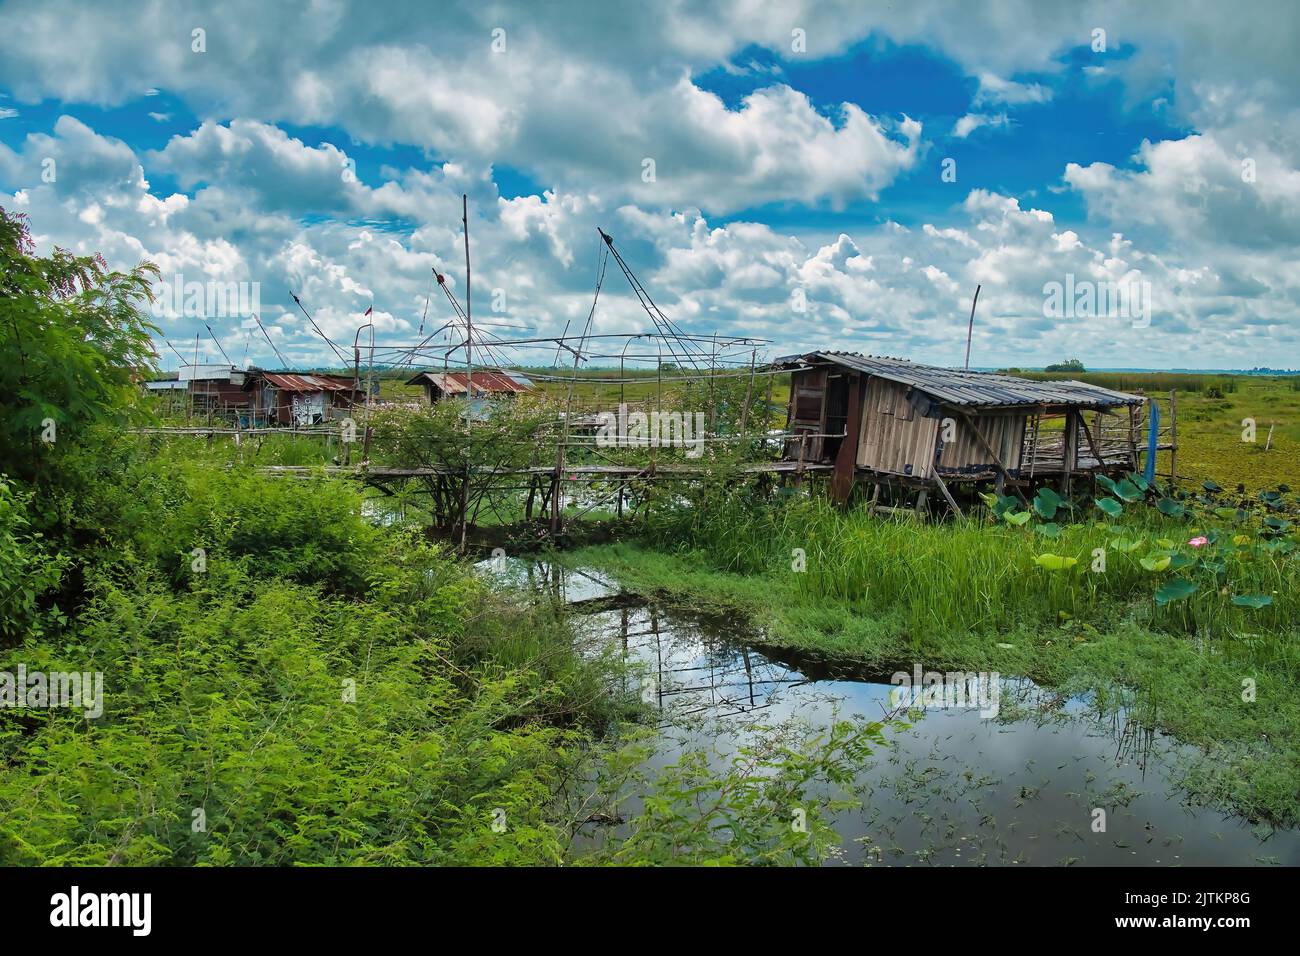 Fisherman’s cabins of corrugated iron in the wetland of the north shore of the Red Lotus Lake (Nong Han Kumphawap), province of Udon Thani, Thailand Stock Photo